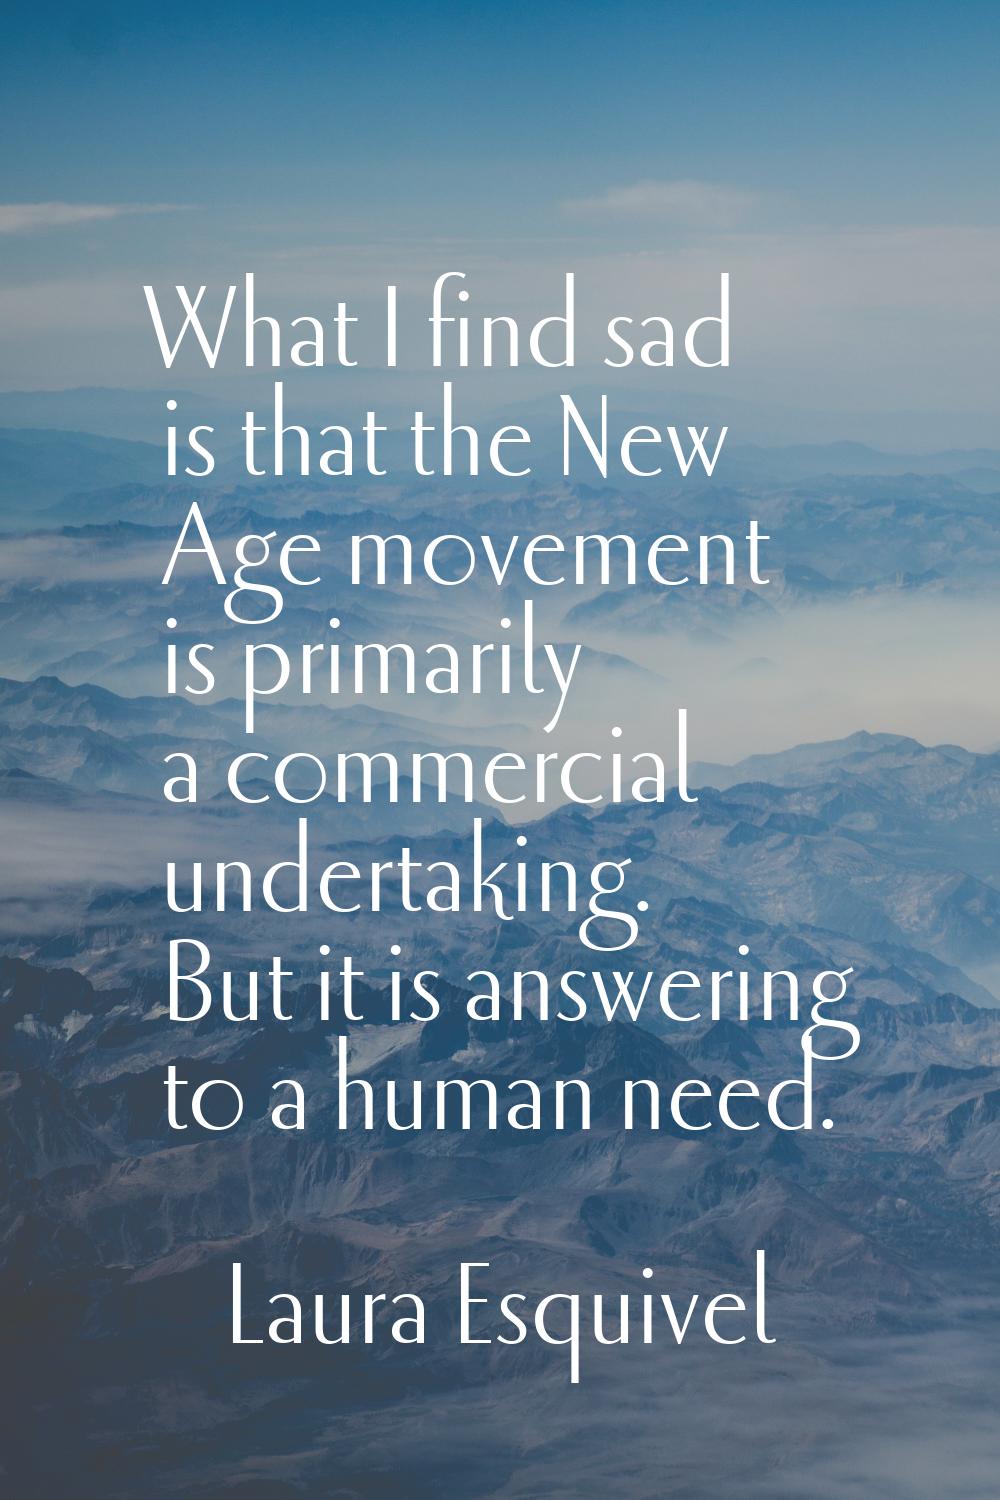 What I find sad is that the New Age movement is primarily a commercial undertaking. But it is answe